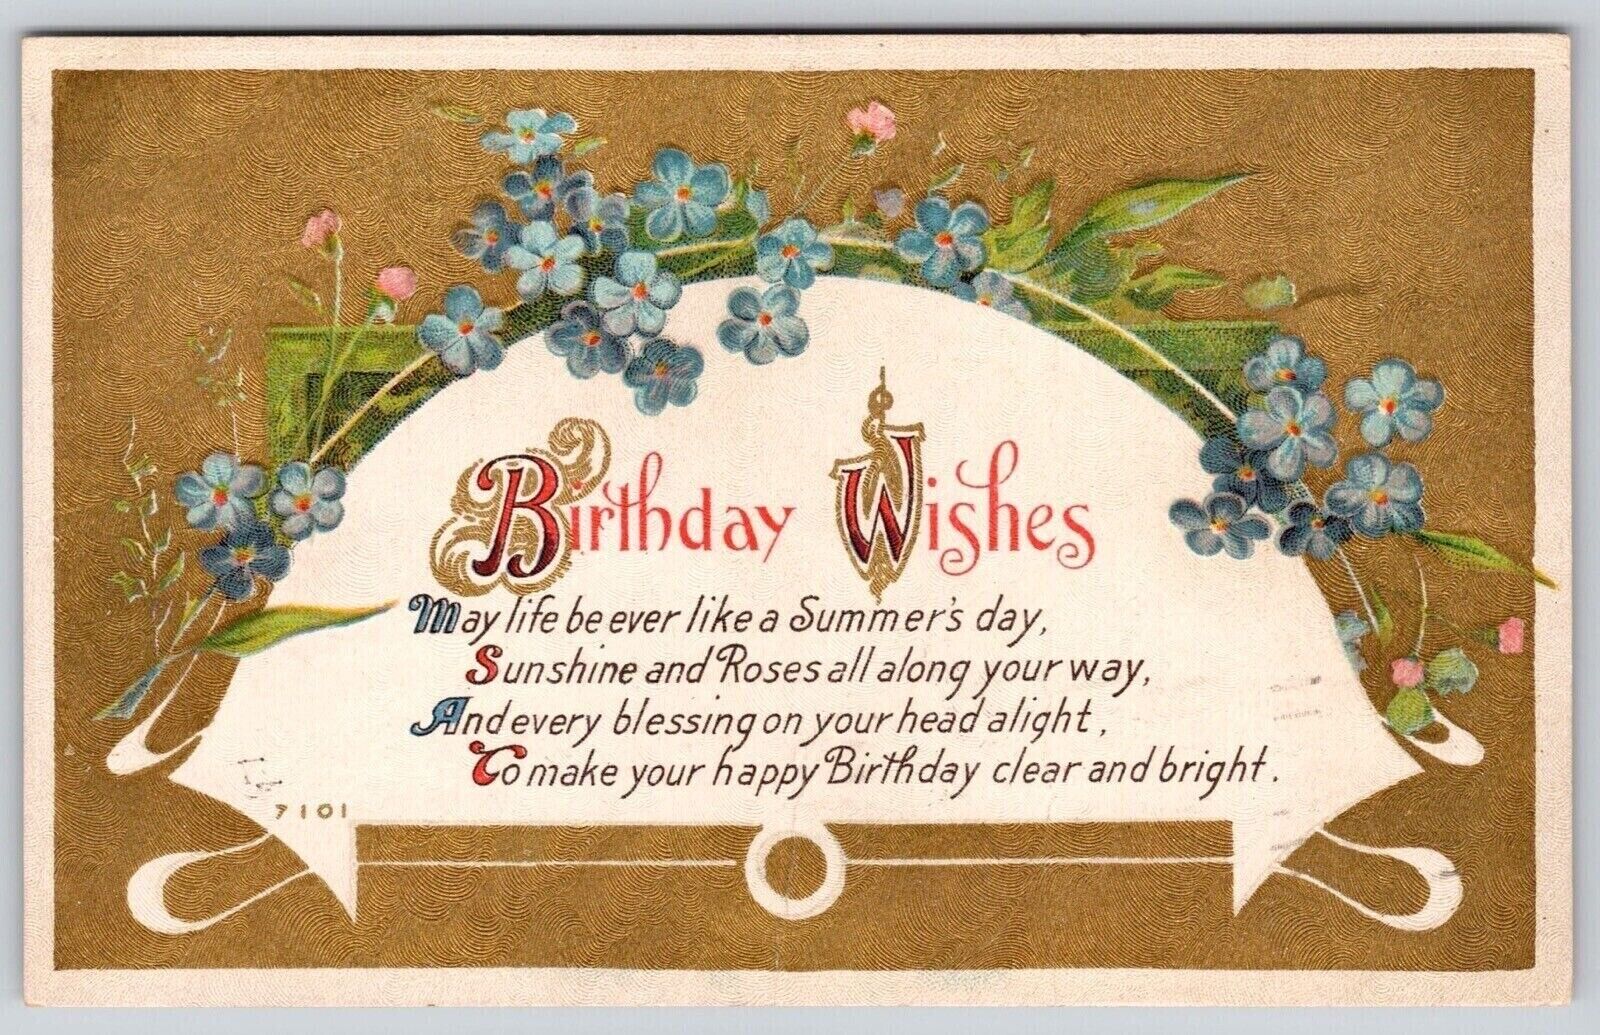 Birthday Wishes Antique Embellished Postcard PM Allentown PA Clean Cancel WOB 1c